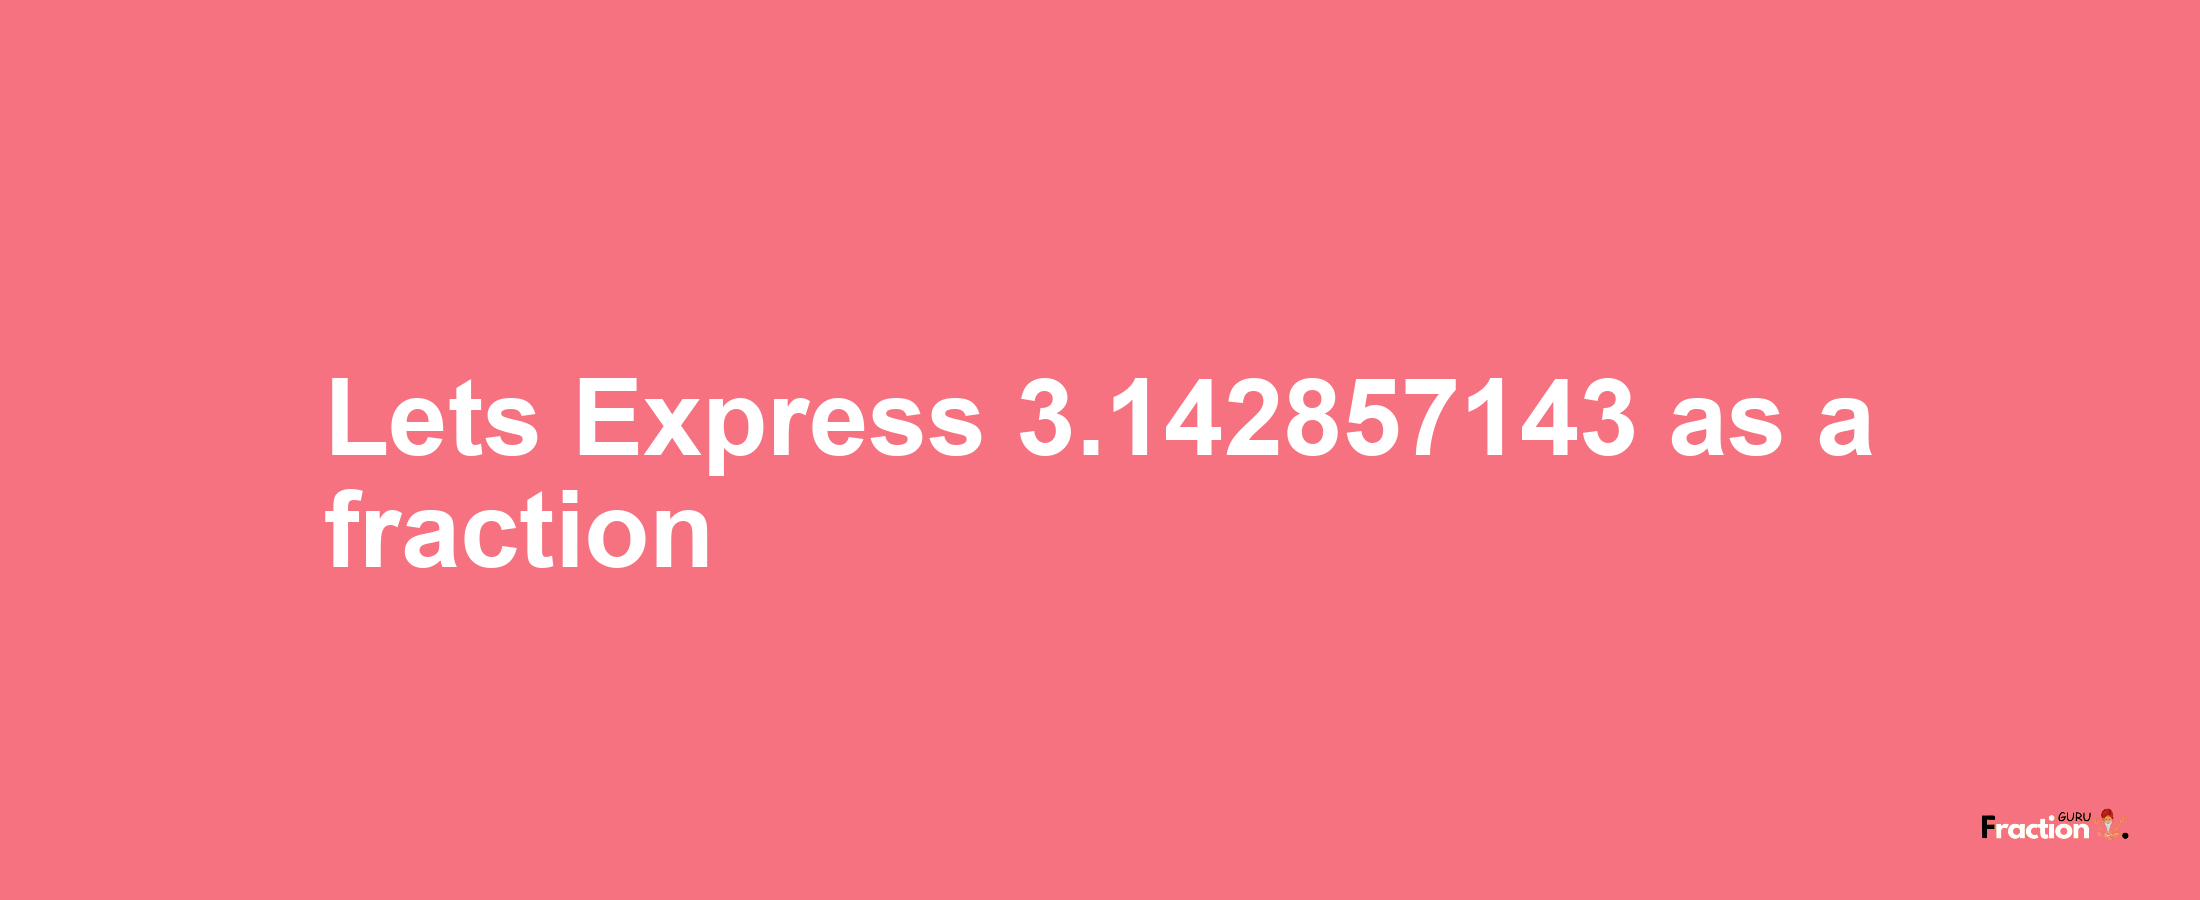 Lets Express 3.142857143 as afraction